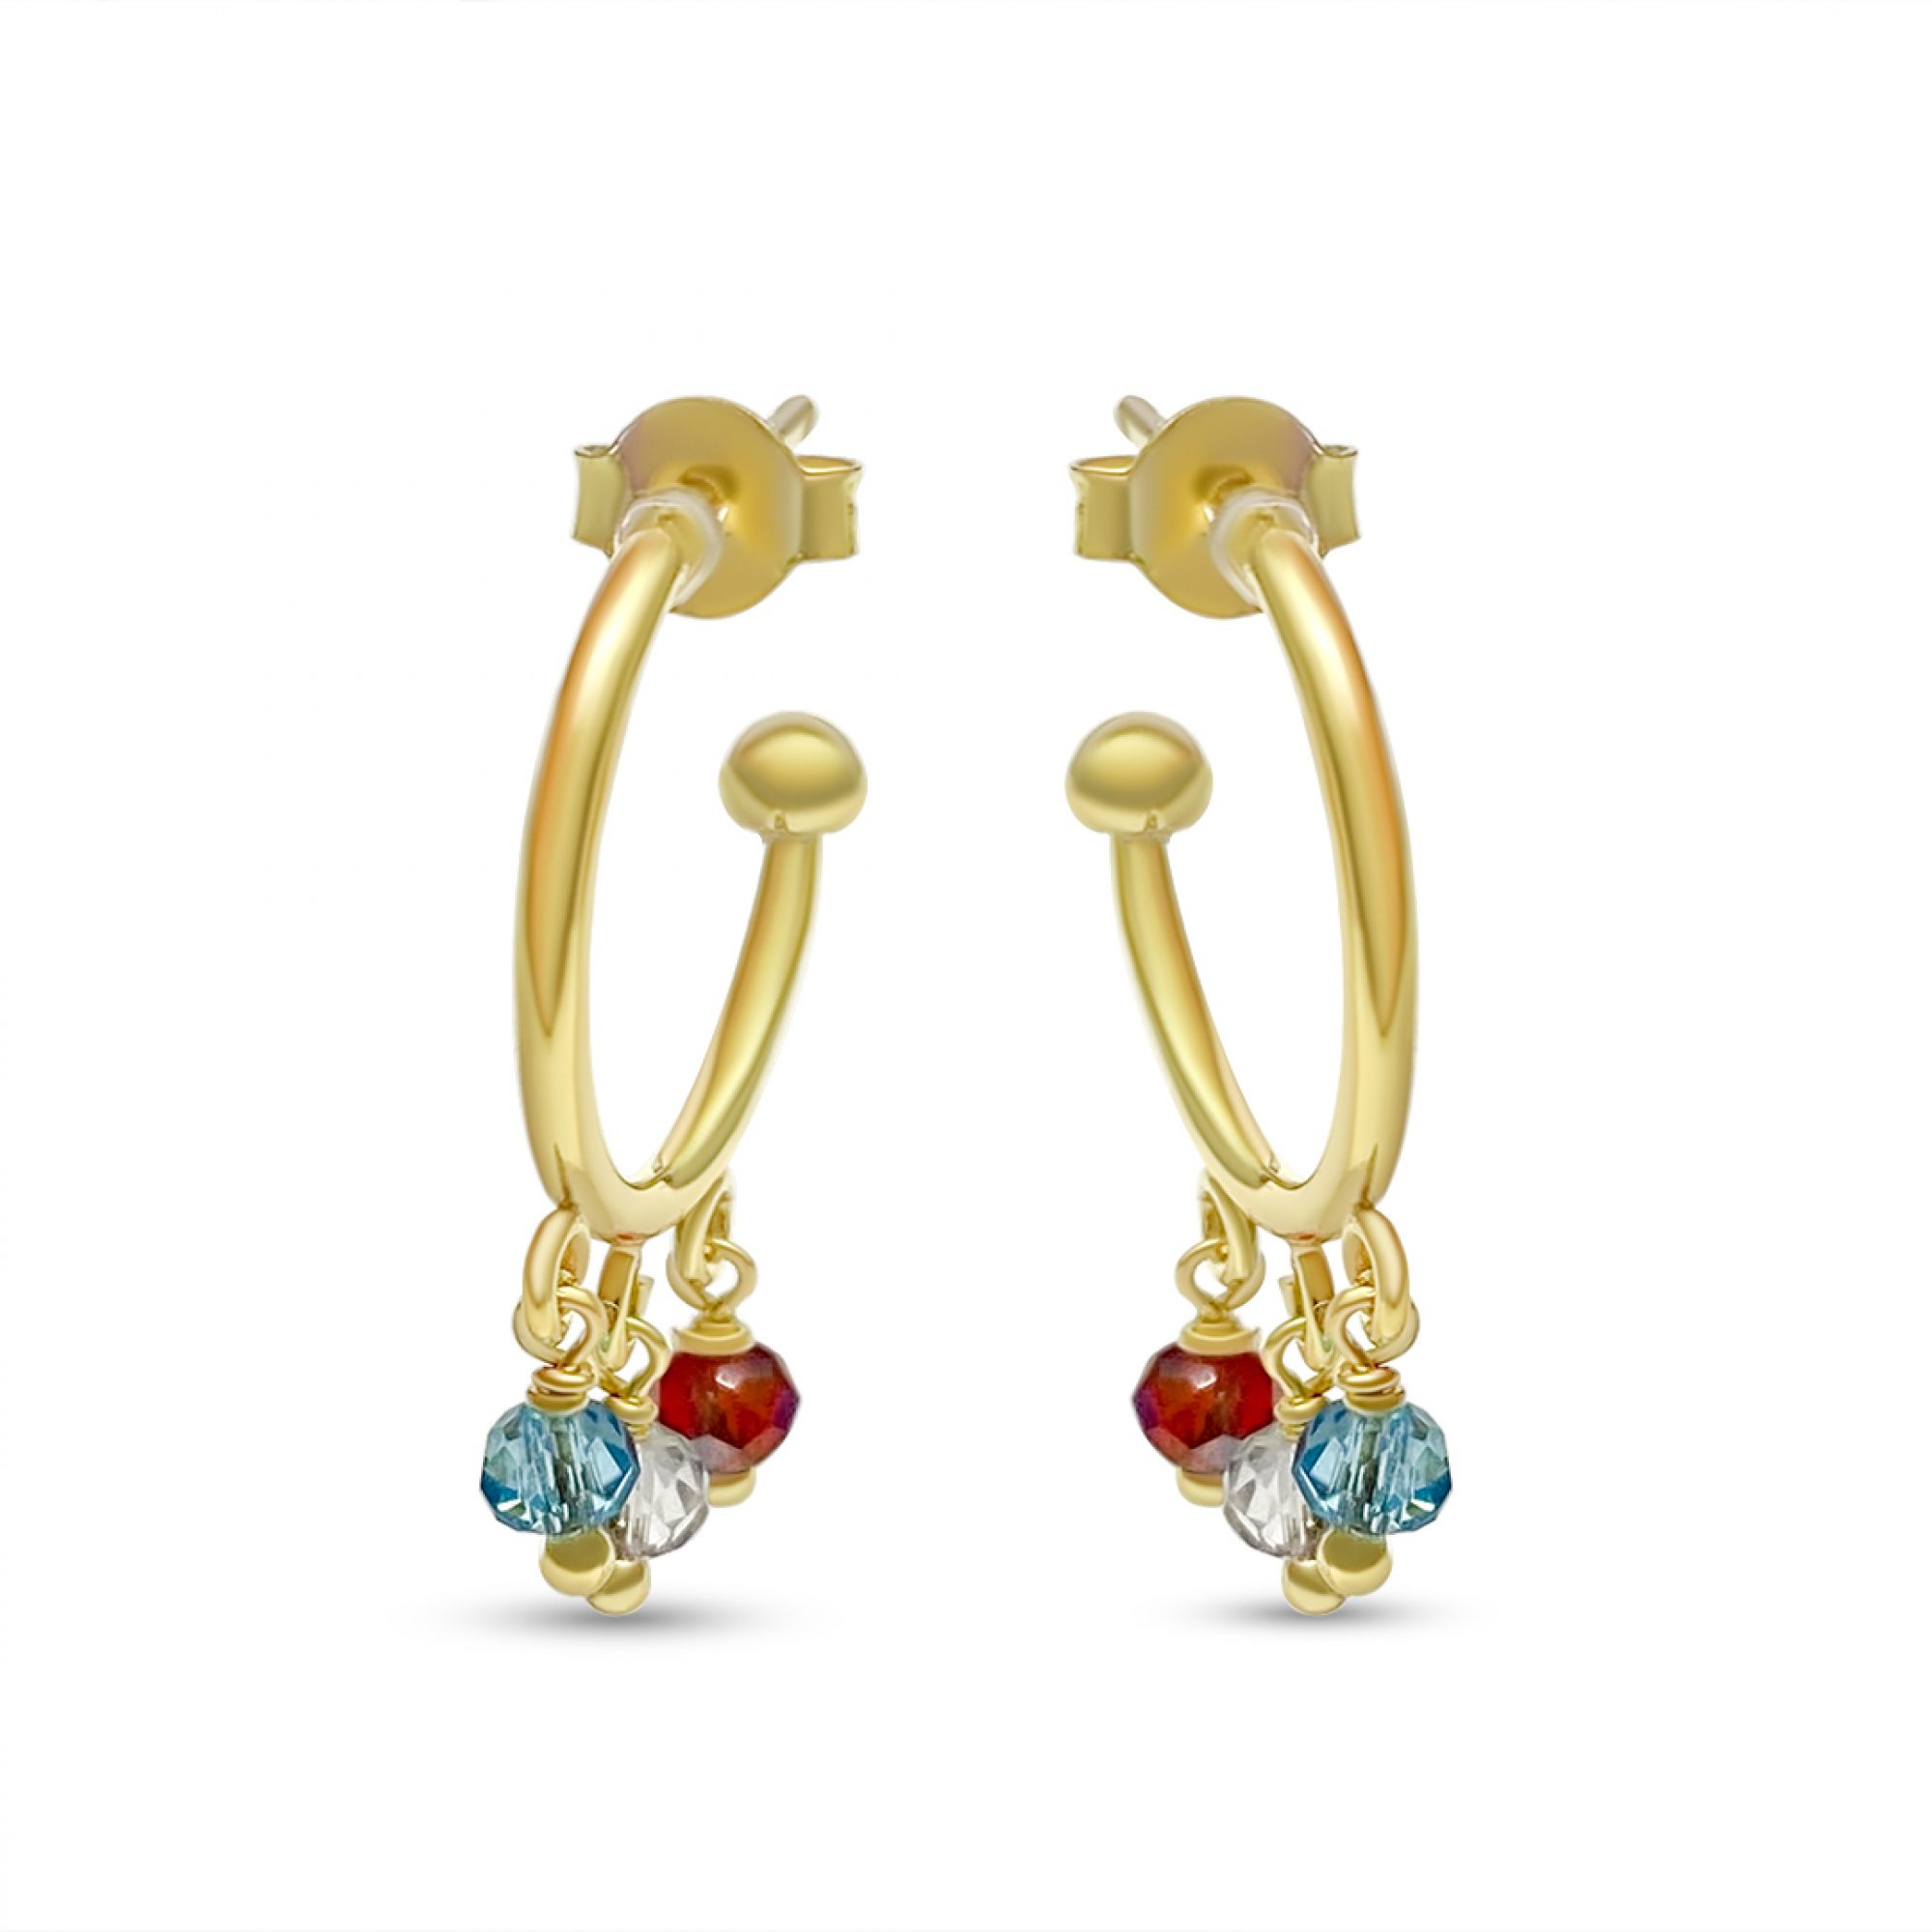 Gold plated earrings with dangle beads